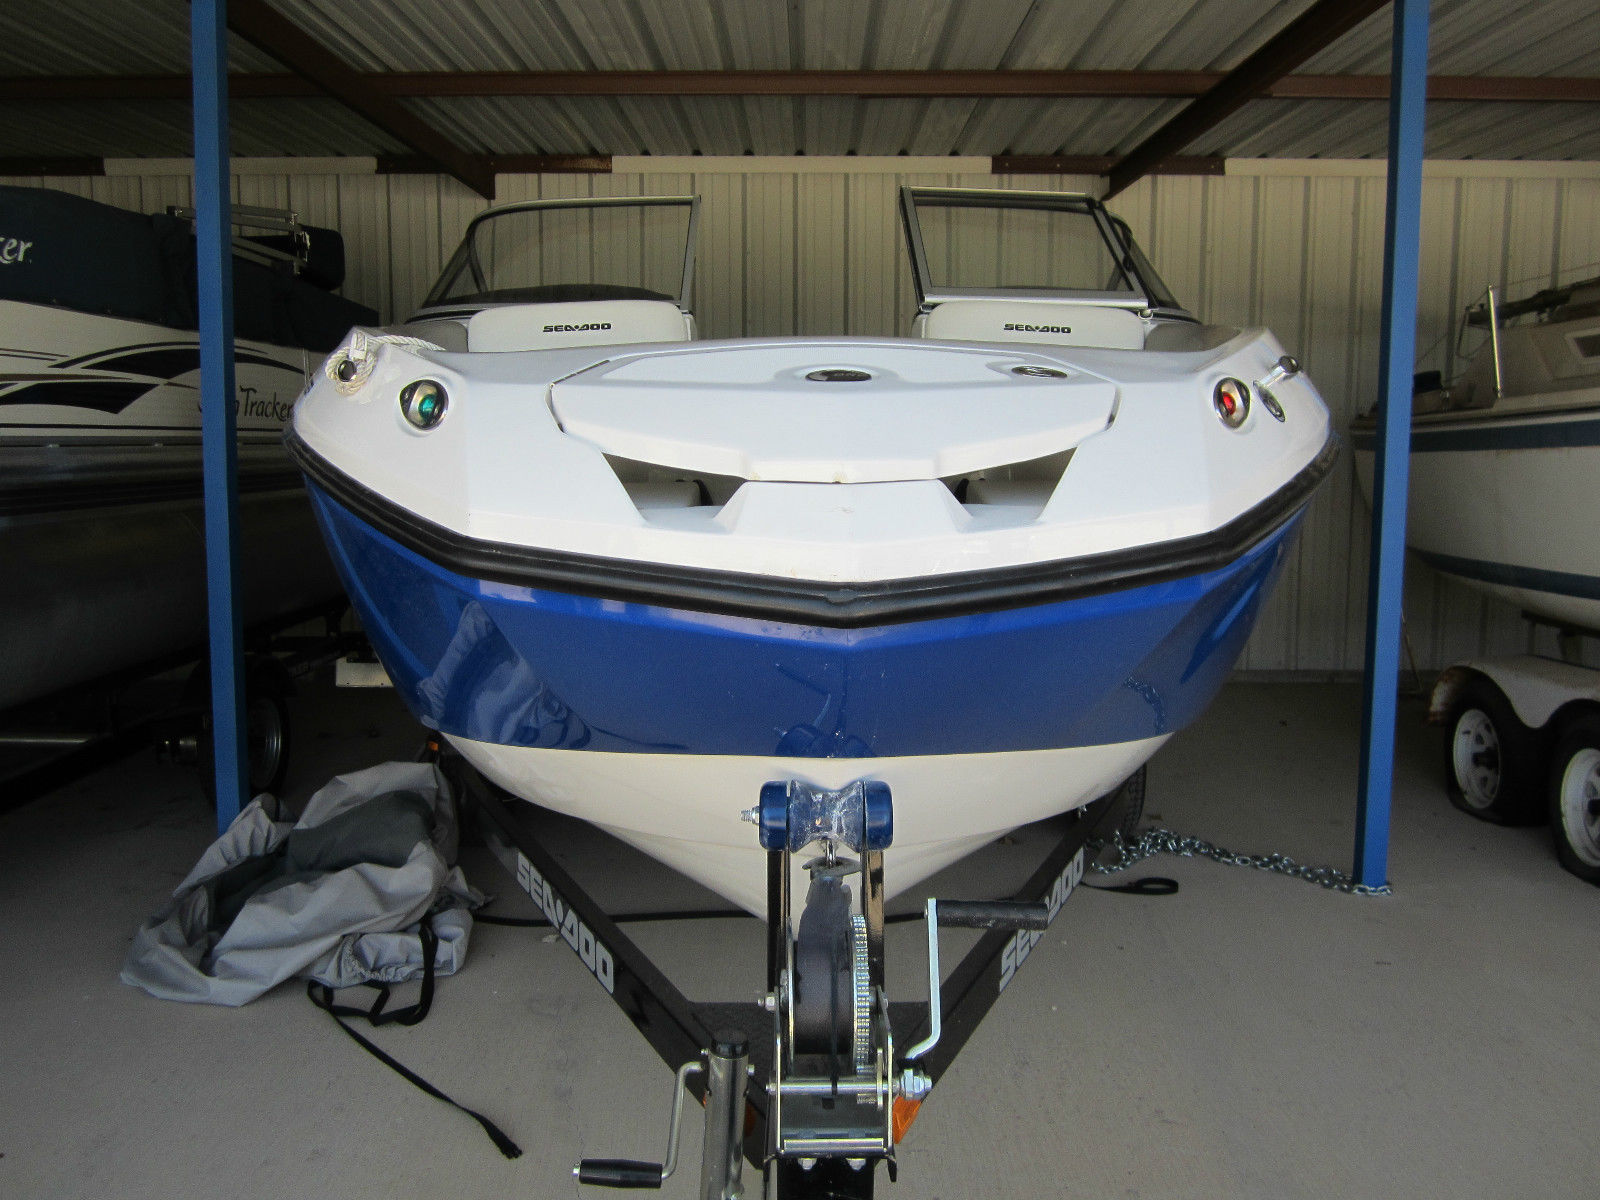 SEA DOO 210 CHALLENGER 2012 for sale for $29,500 - Boats 